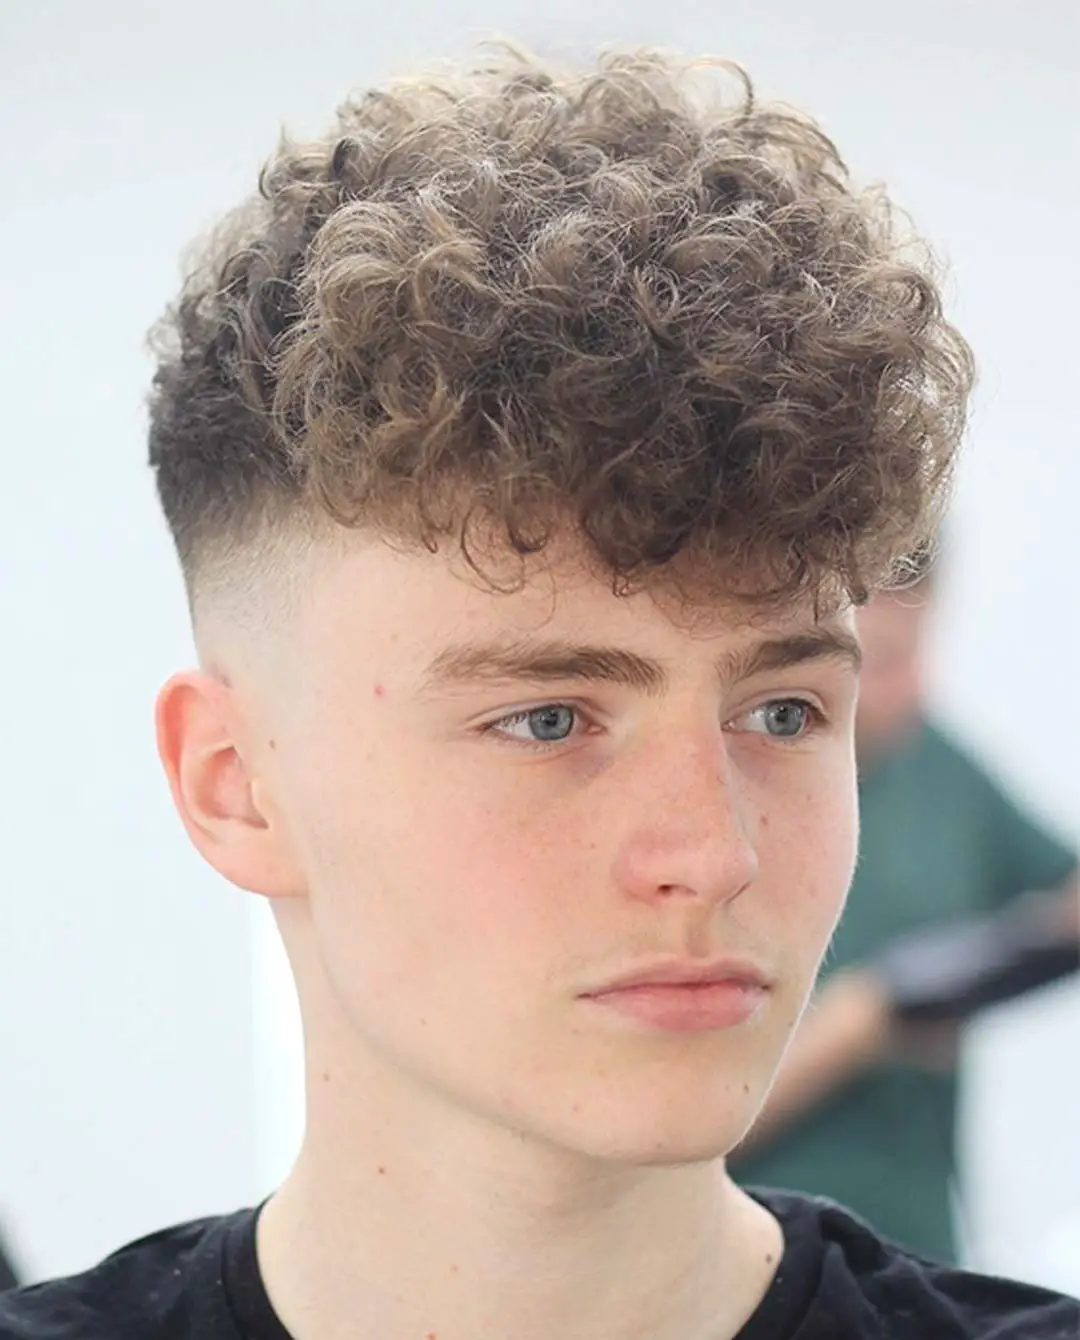 Teen Boy with Curly Fringe